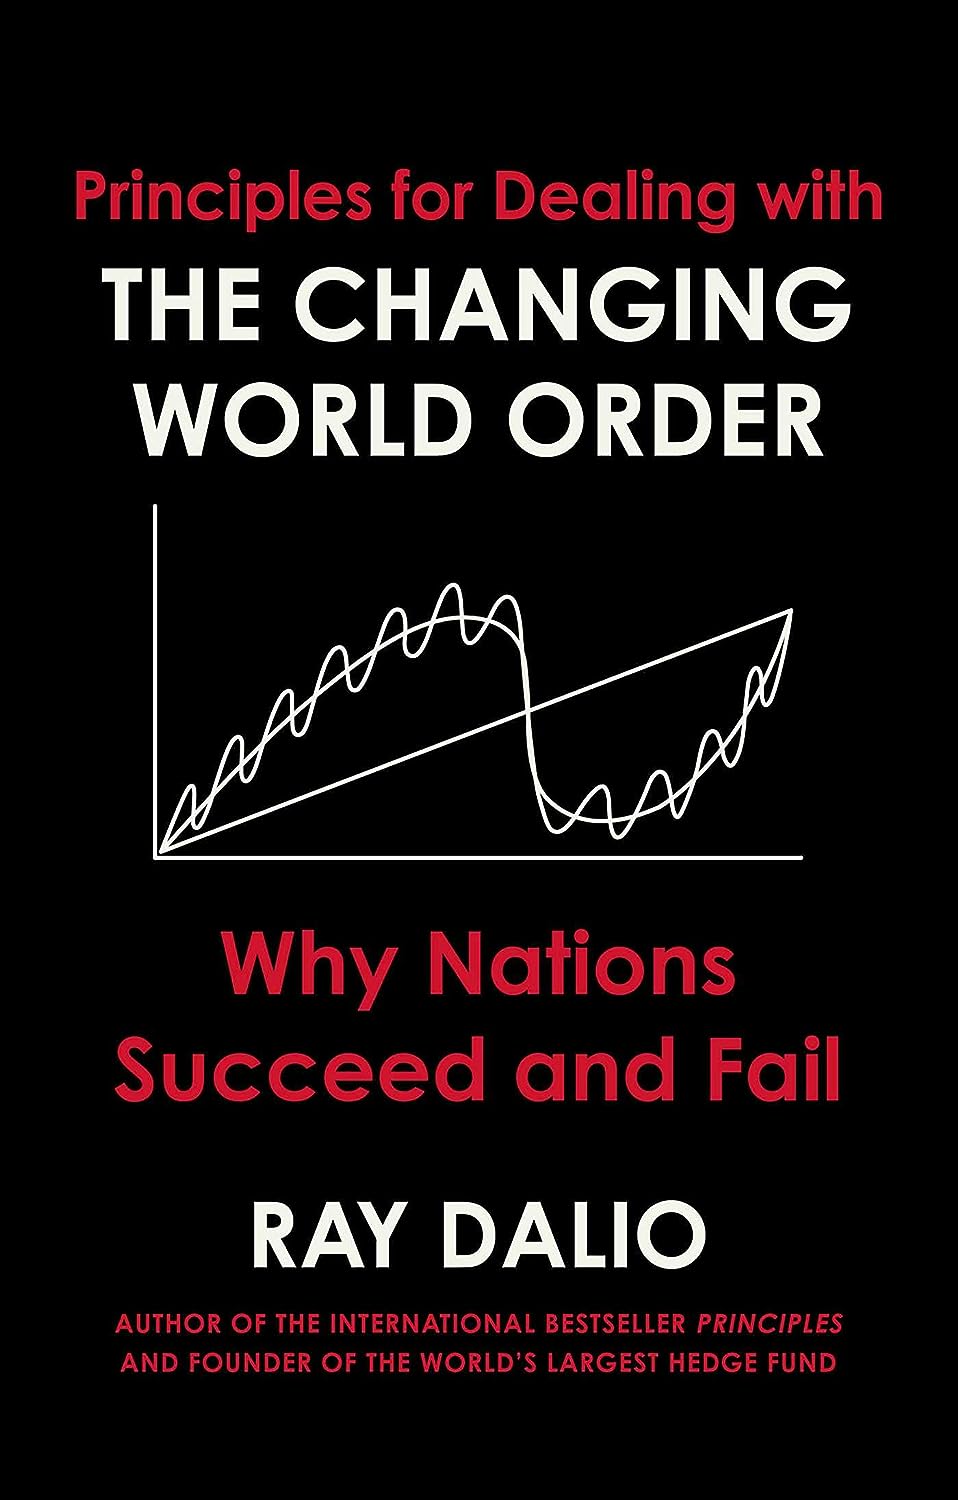 Ray Dalio: Principles for Dealing with the Changing World Order (Hardcover, Simon & Schuster UK)